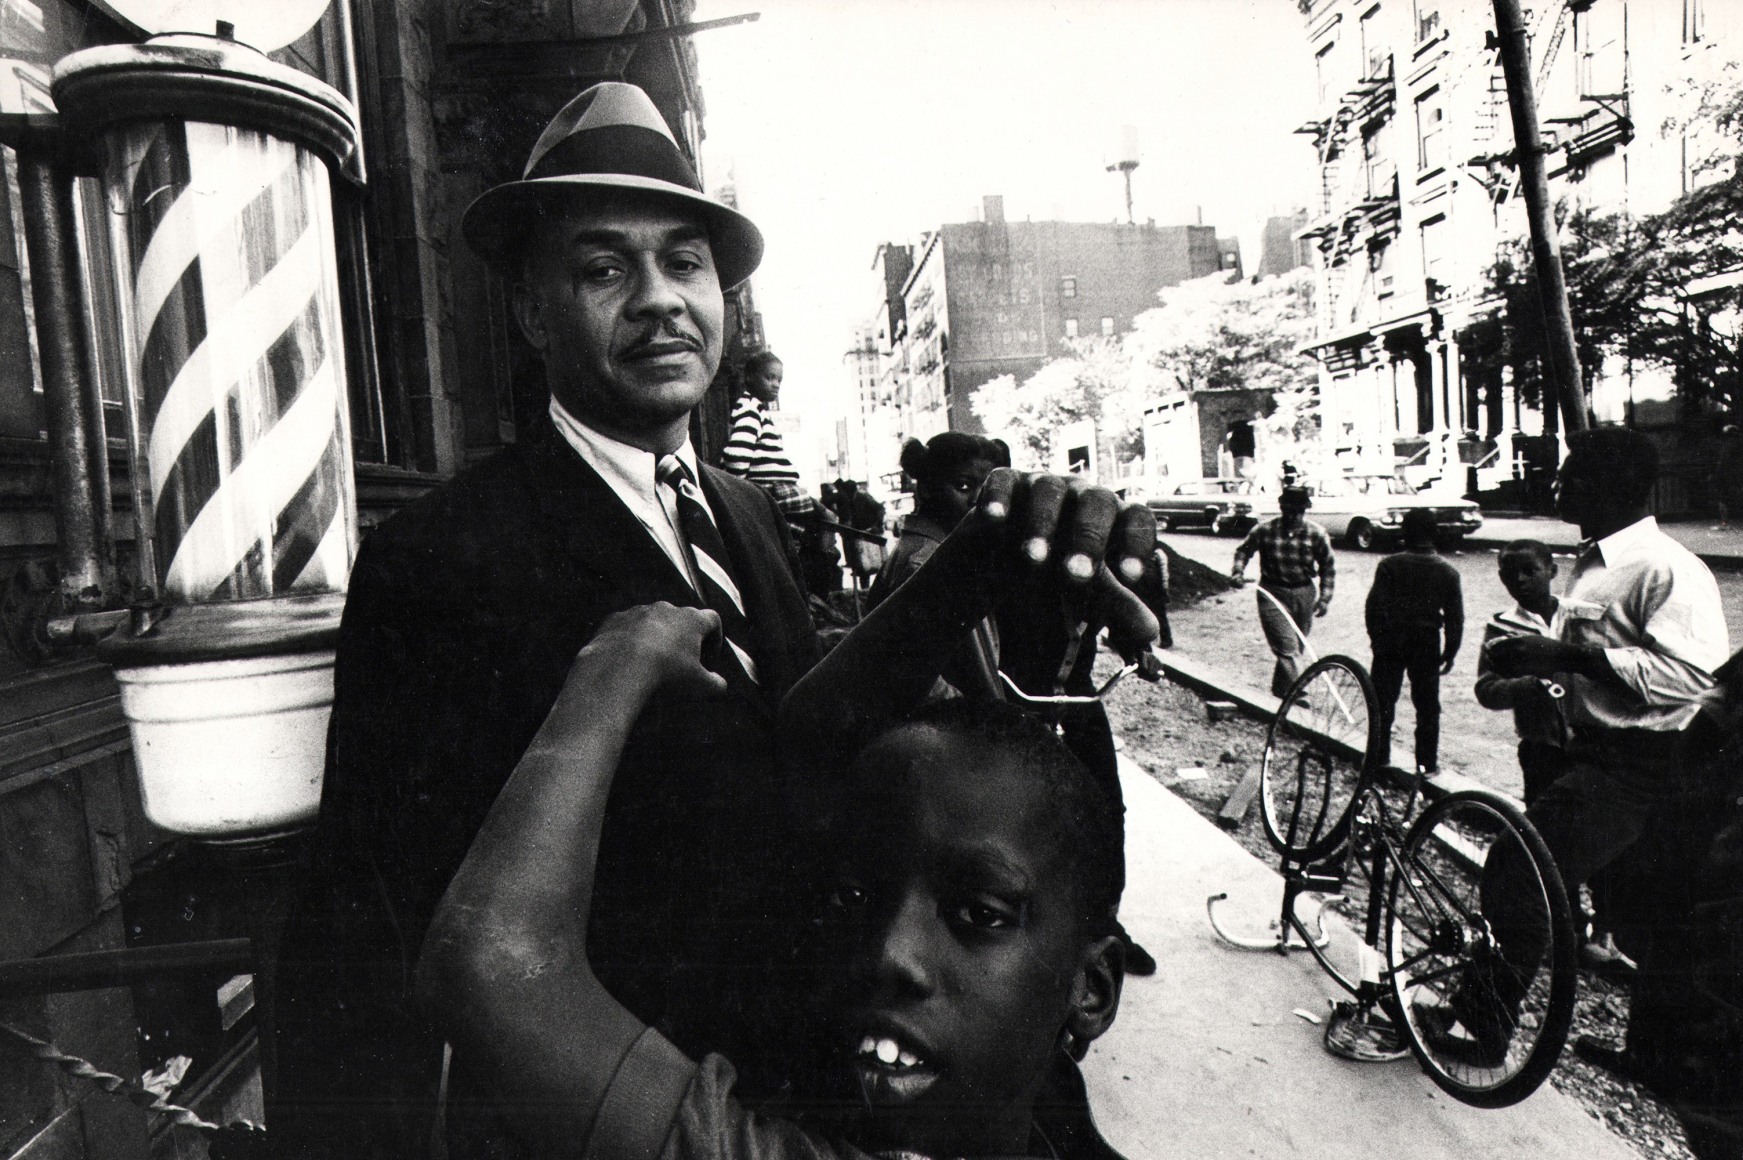 David Attie, Ralph Ellison in Harlem, ​1966. Subject poses on the street beside a barber shop, looking into the camera as various figures move around him.